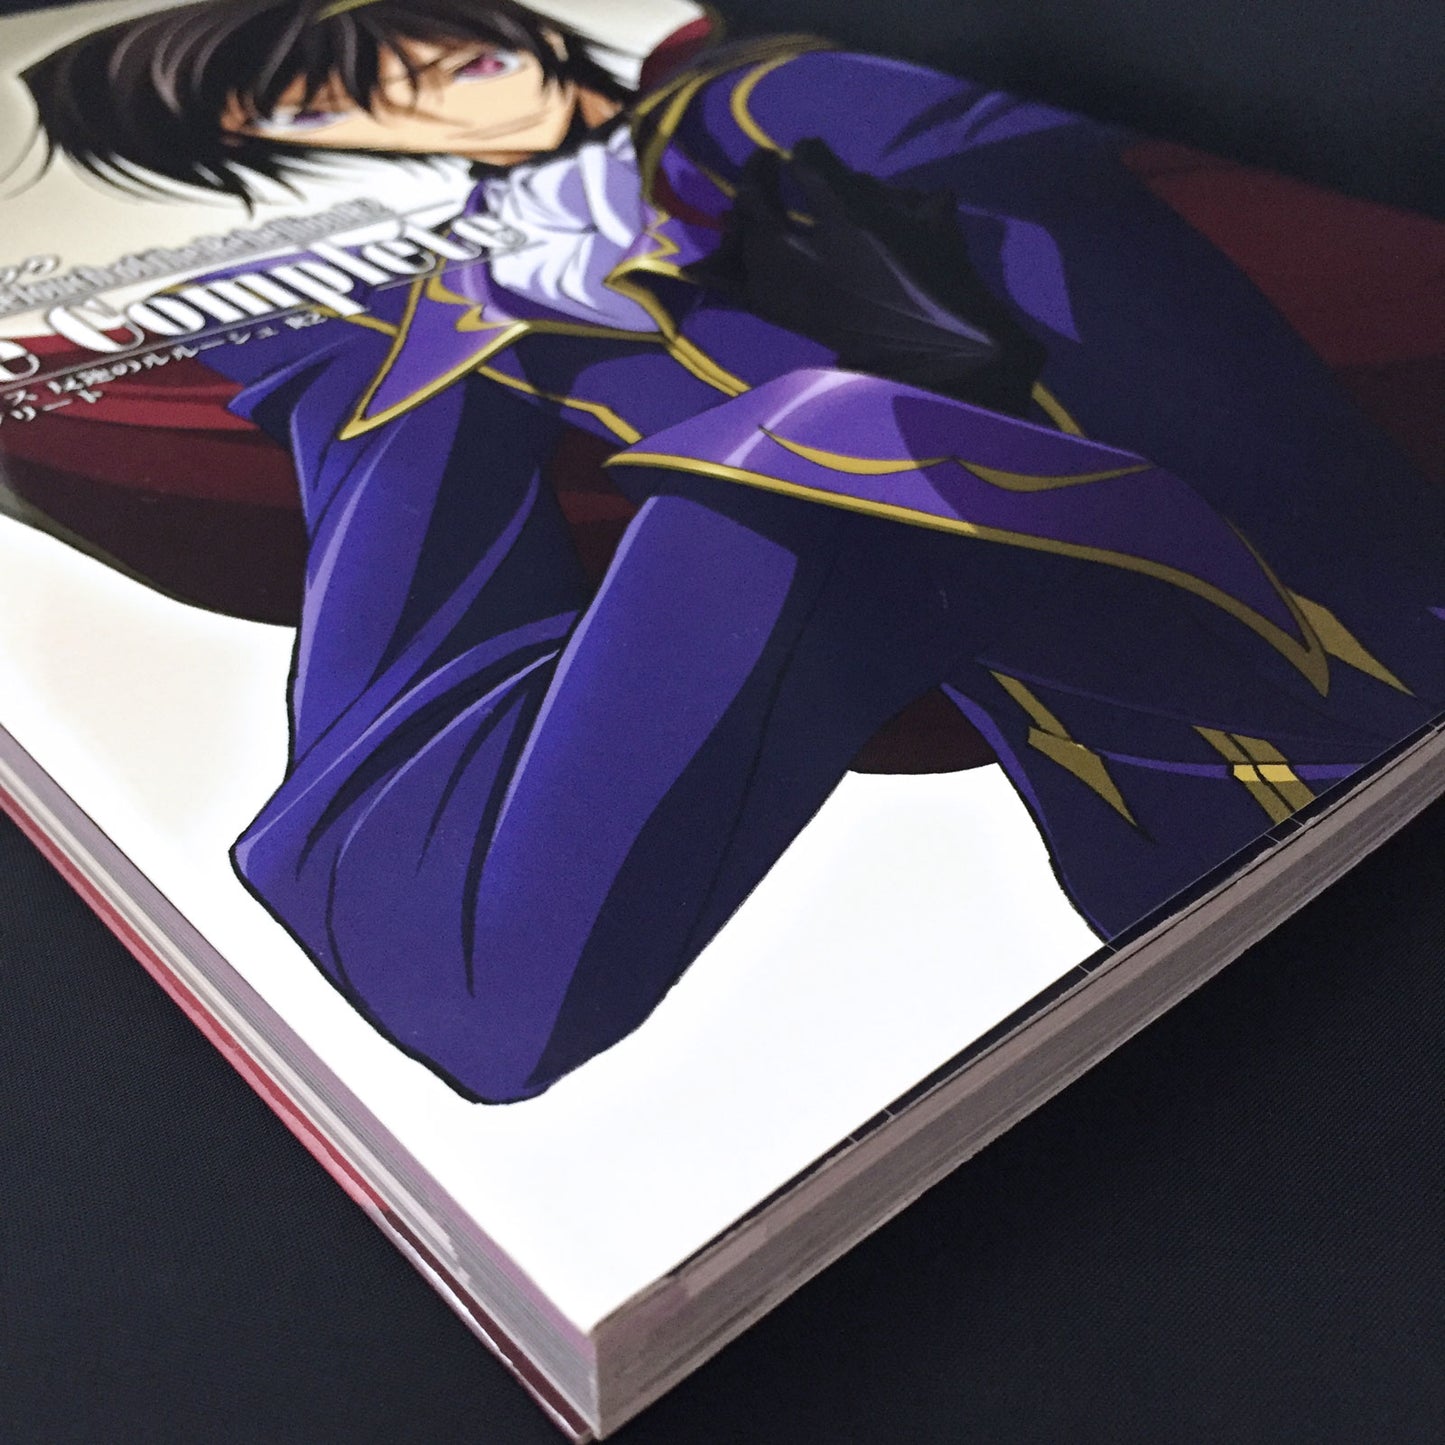 CODE GEASS Lelouch of the Rebellion R2 Official Guide Book The Complete